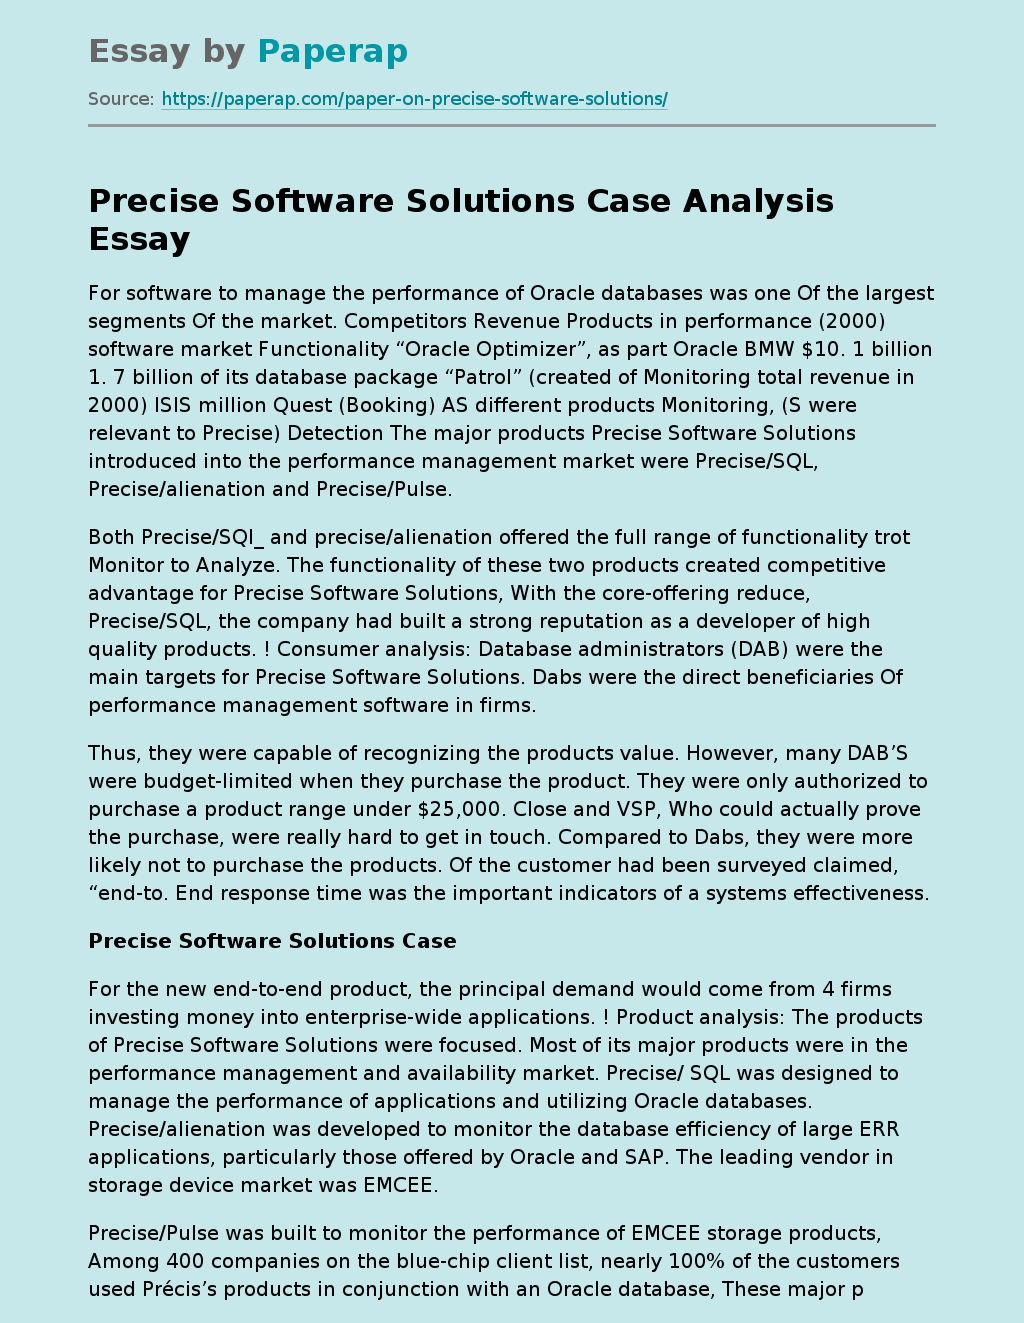 Precise Software Solutions Case Analysis